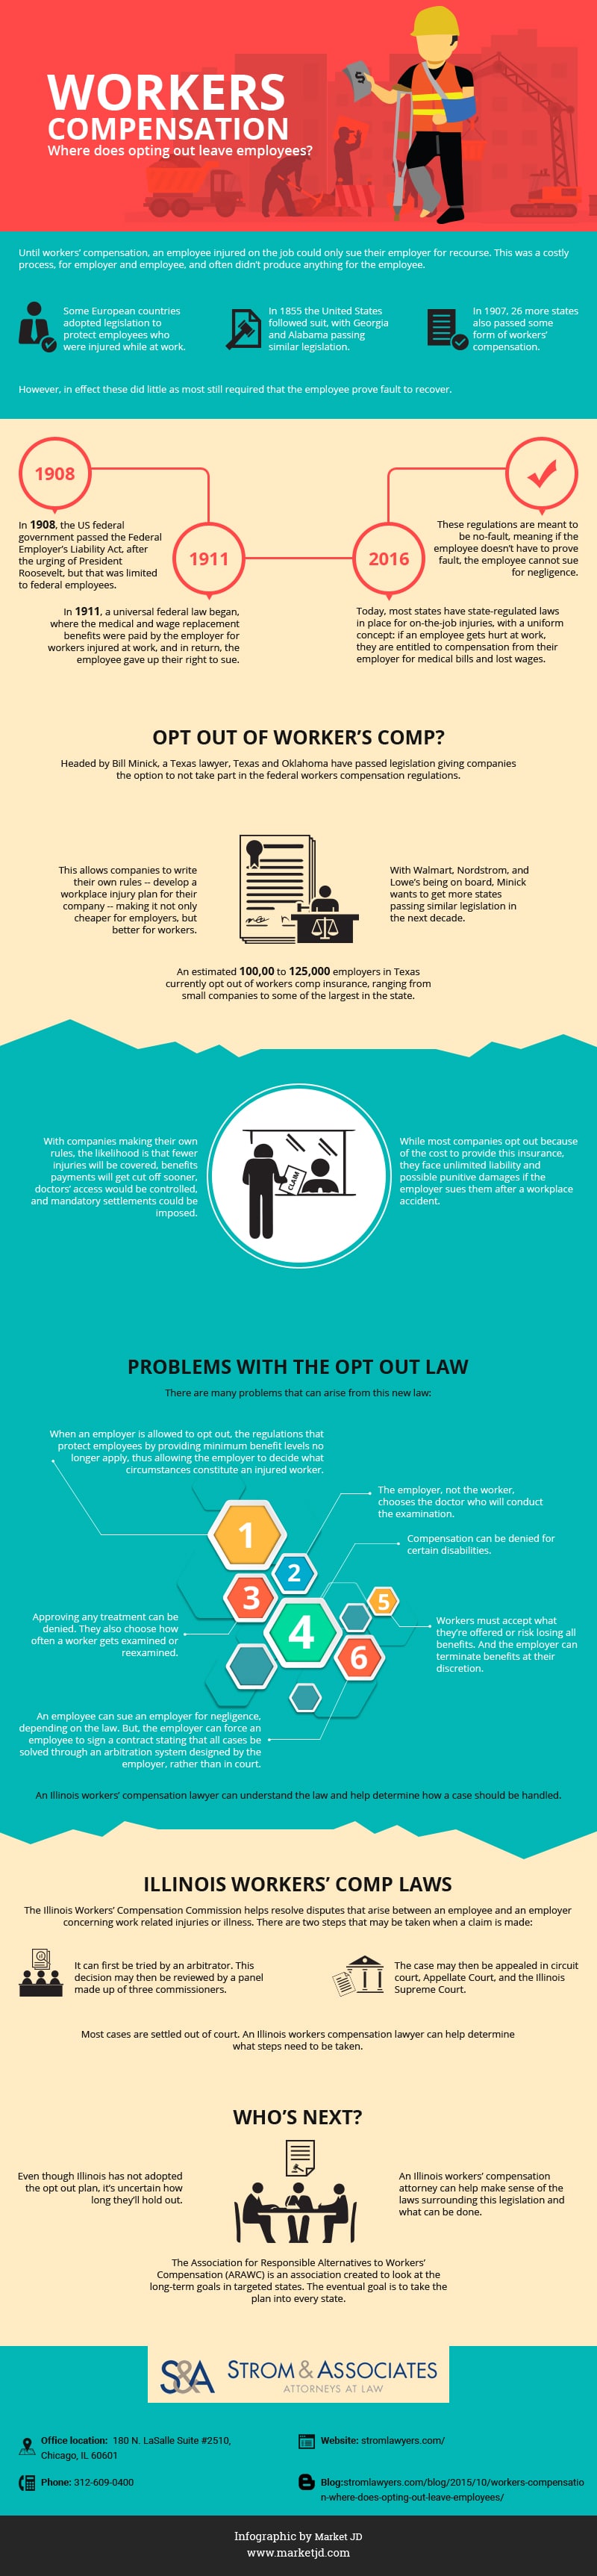 workers' comp infographic